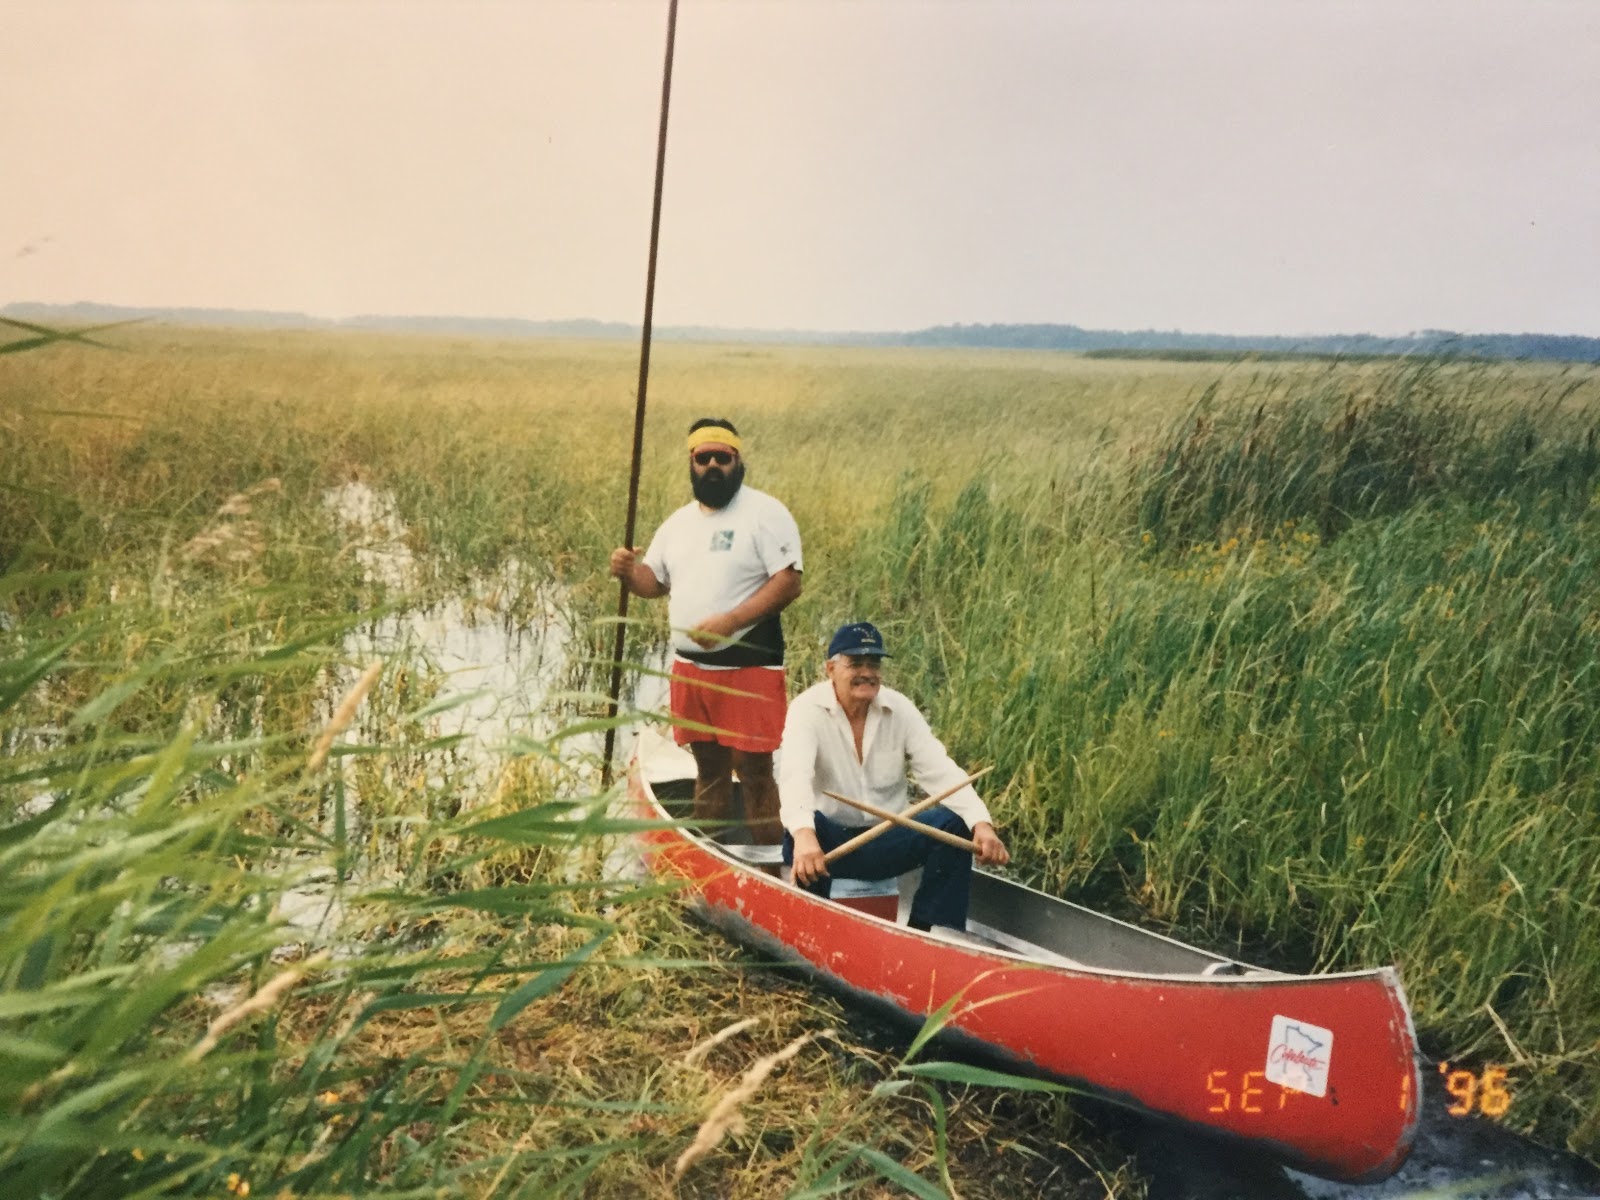 A red canoe with two men -- one bearded with sunglasses and standing, the other older and sitting in a baseball camp and white button-down shirt -- moves through a body of water thick with green stalks of wild rice